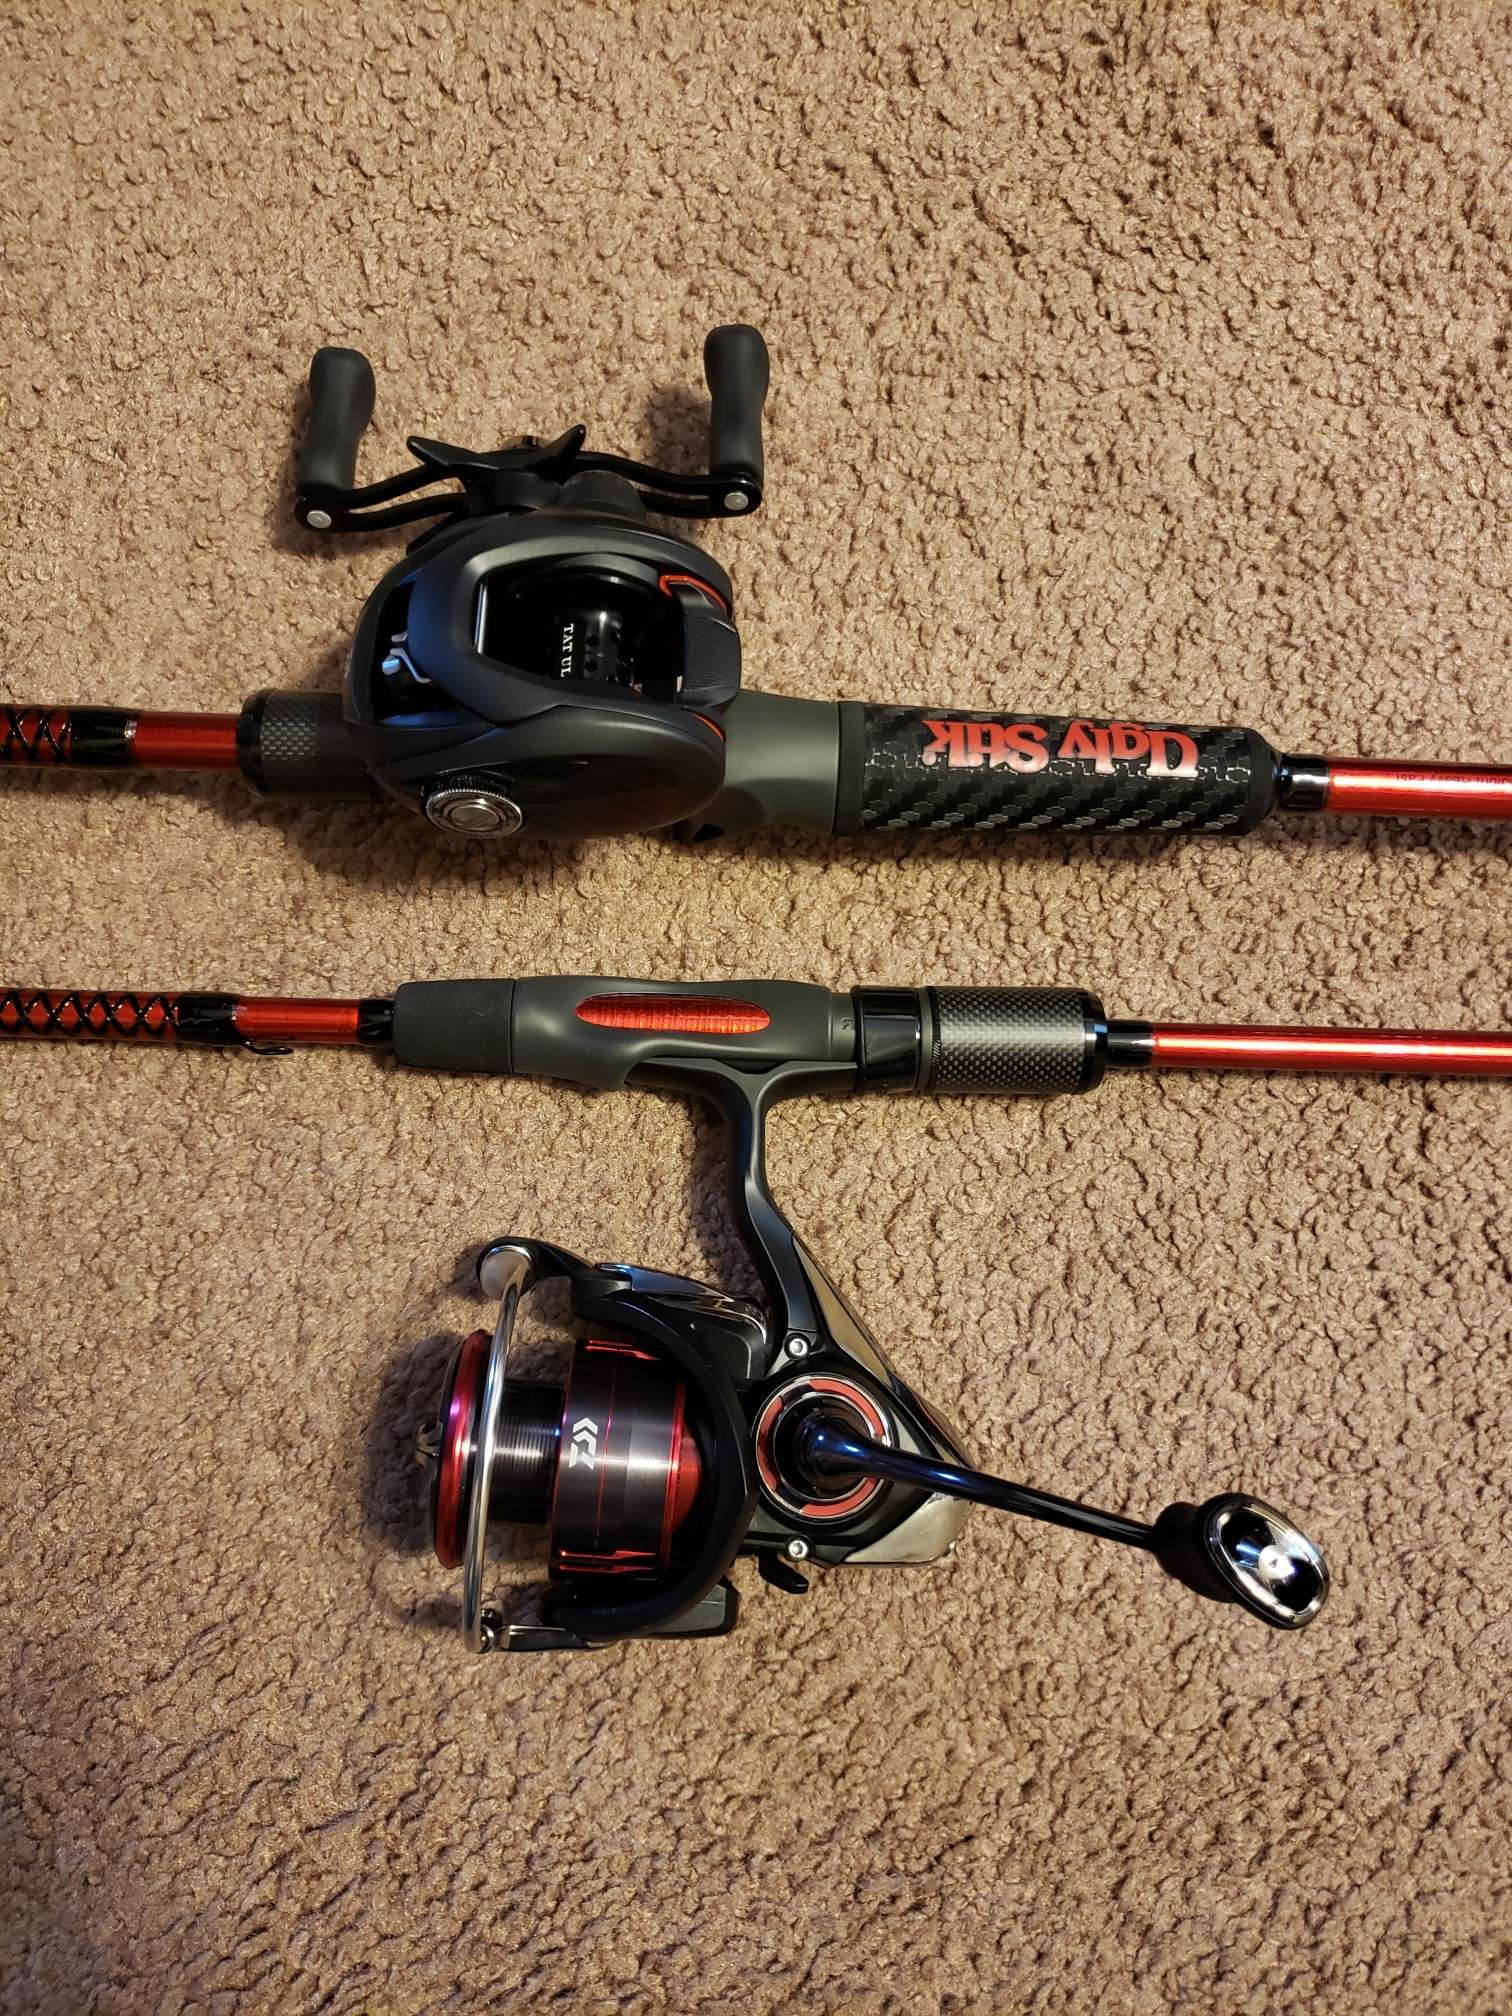 Setups around $200-300 - Fishing Rods, Reels, Line, and Knots